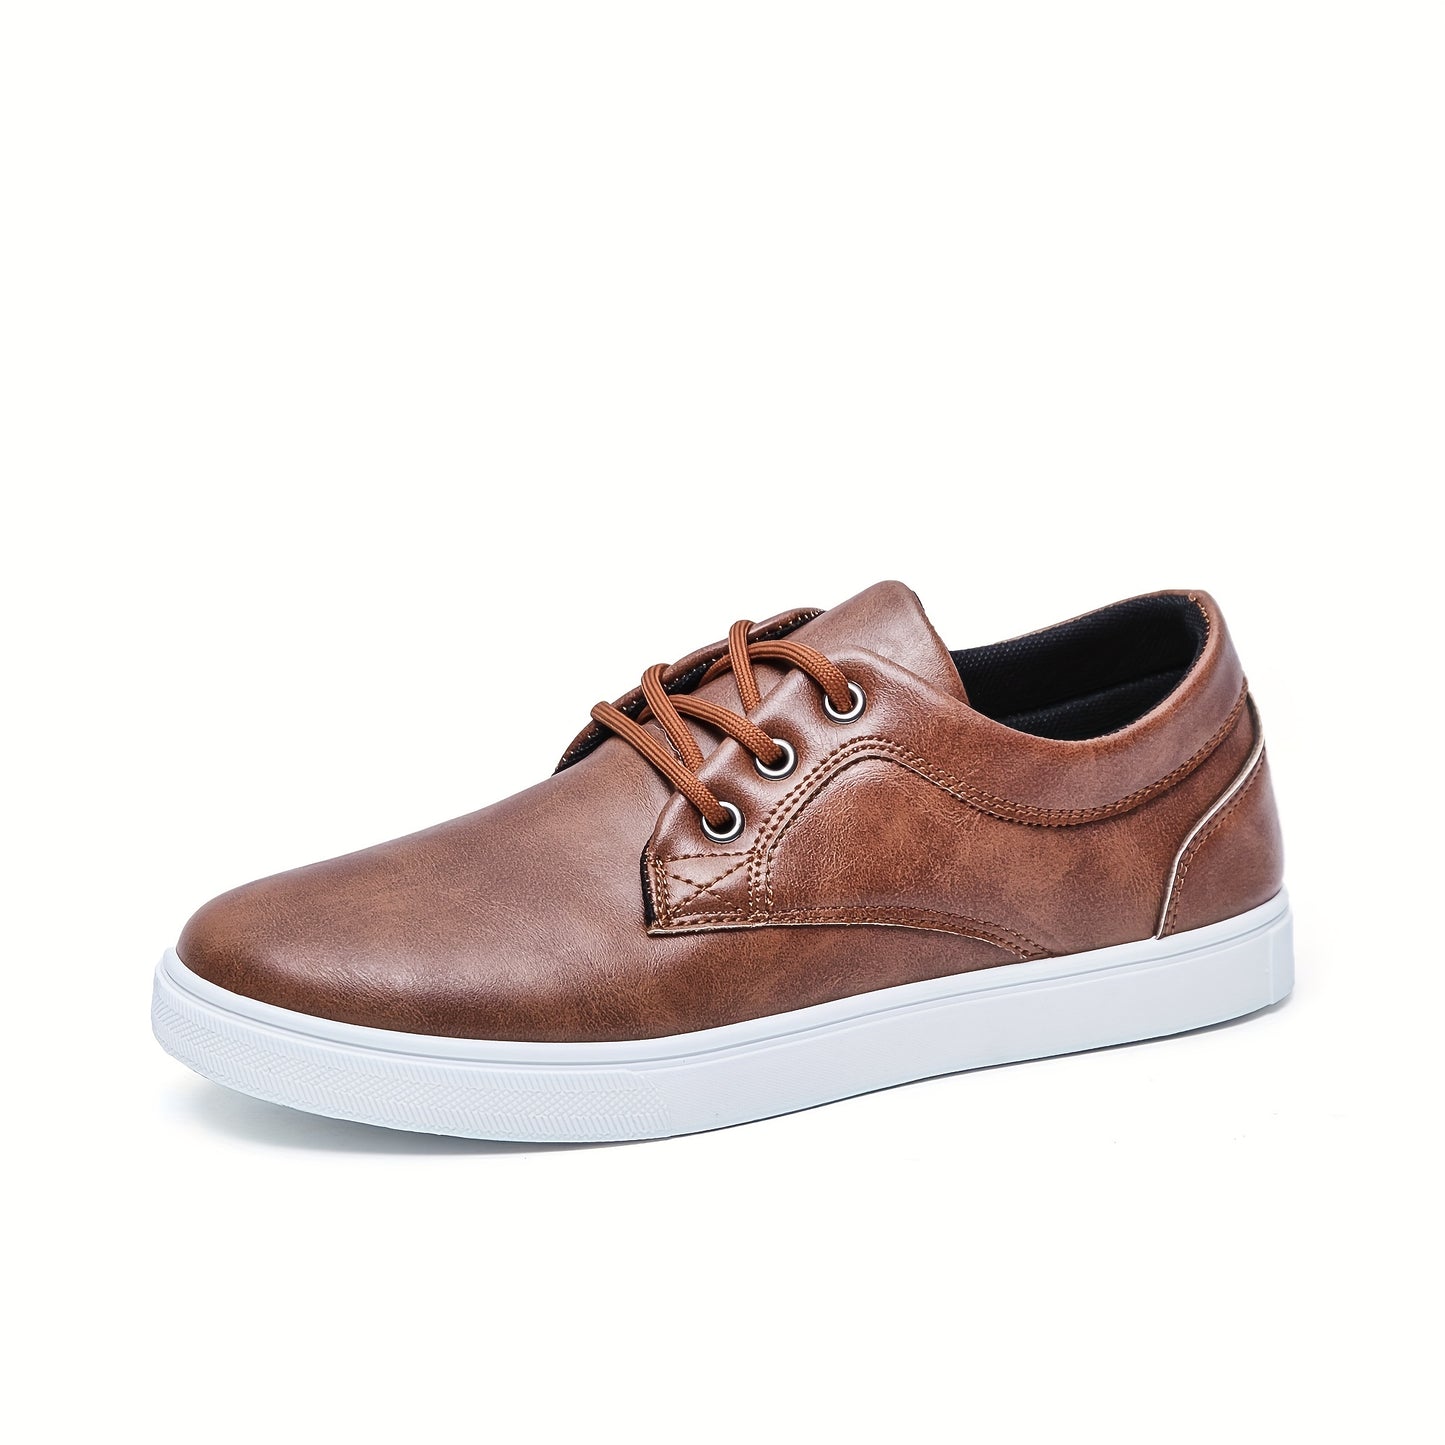 pu leather skate shoes: Durable PU Leather, Breathable Design, Enhanced Traction - Men's Shoes-CasualFlowshop 